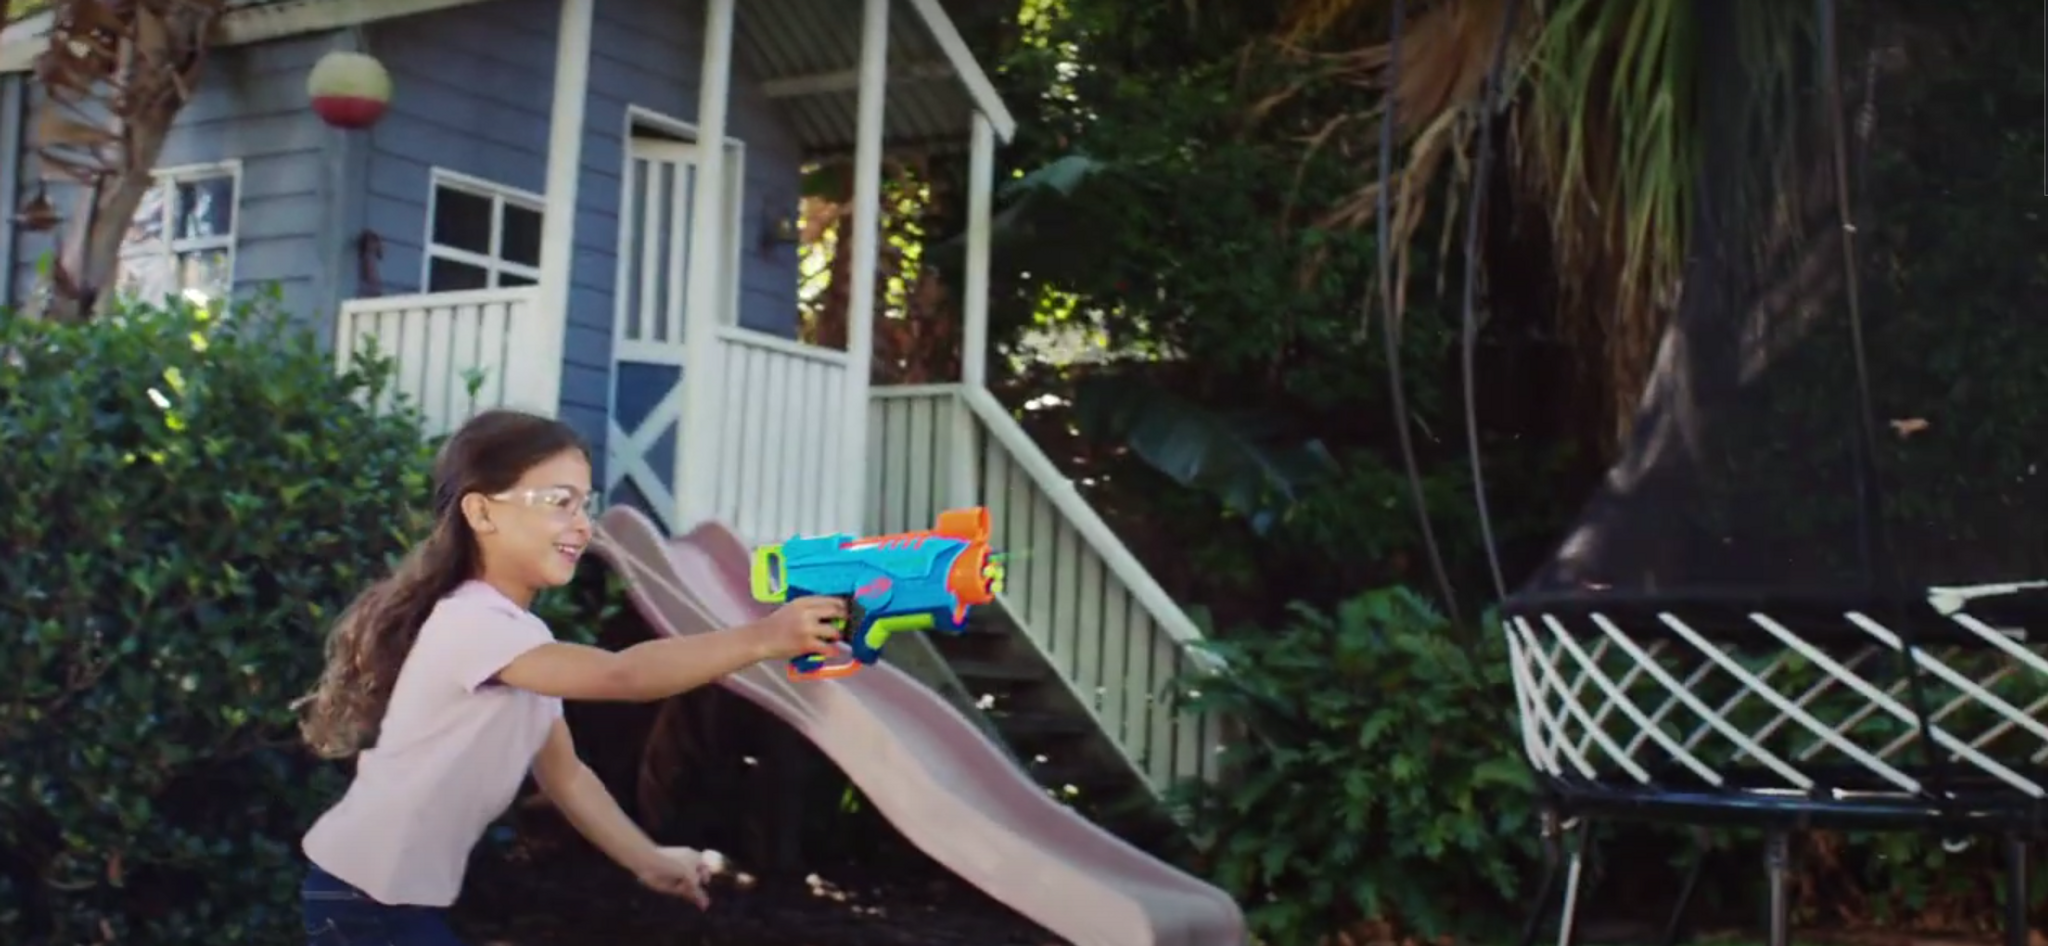 Hasbro smashes gender stereotypes with Nerf Gun ad